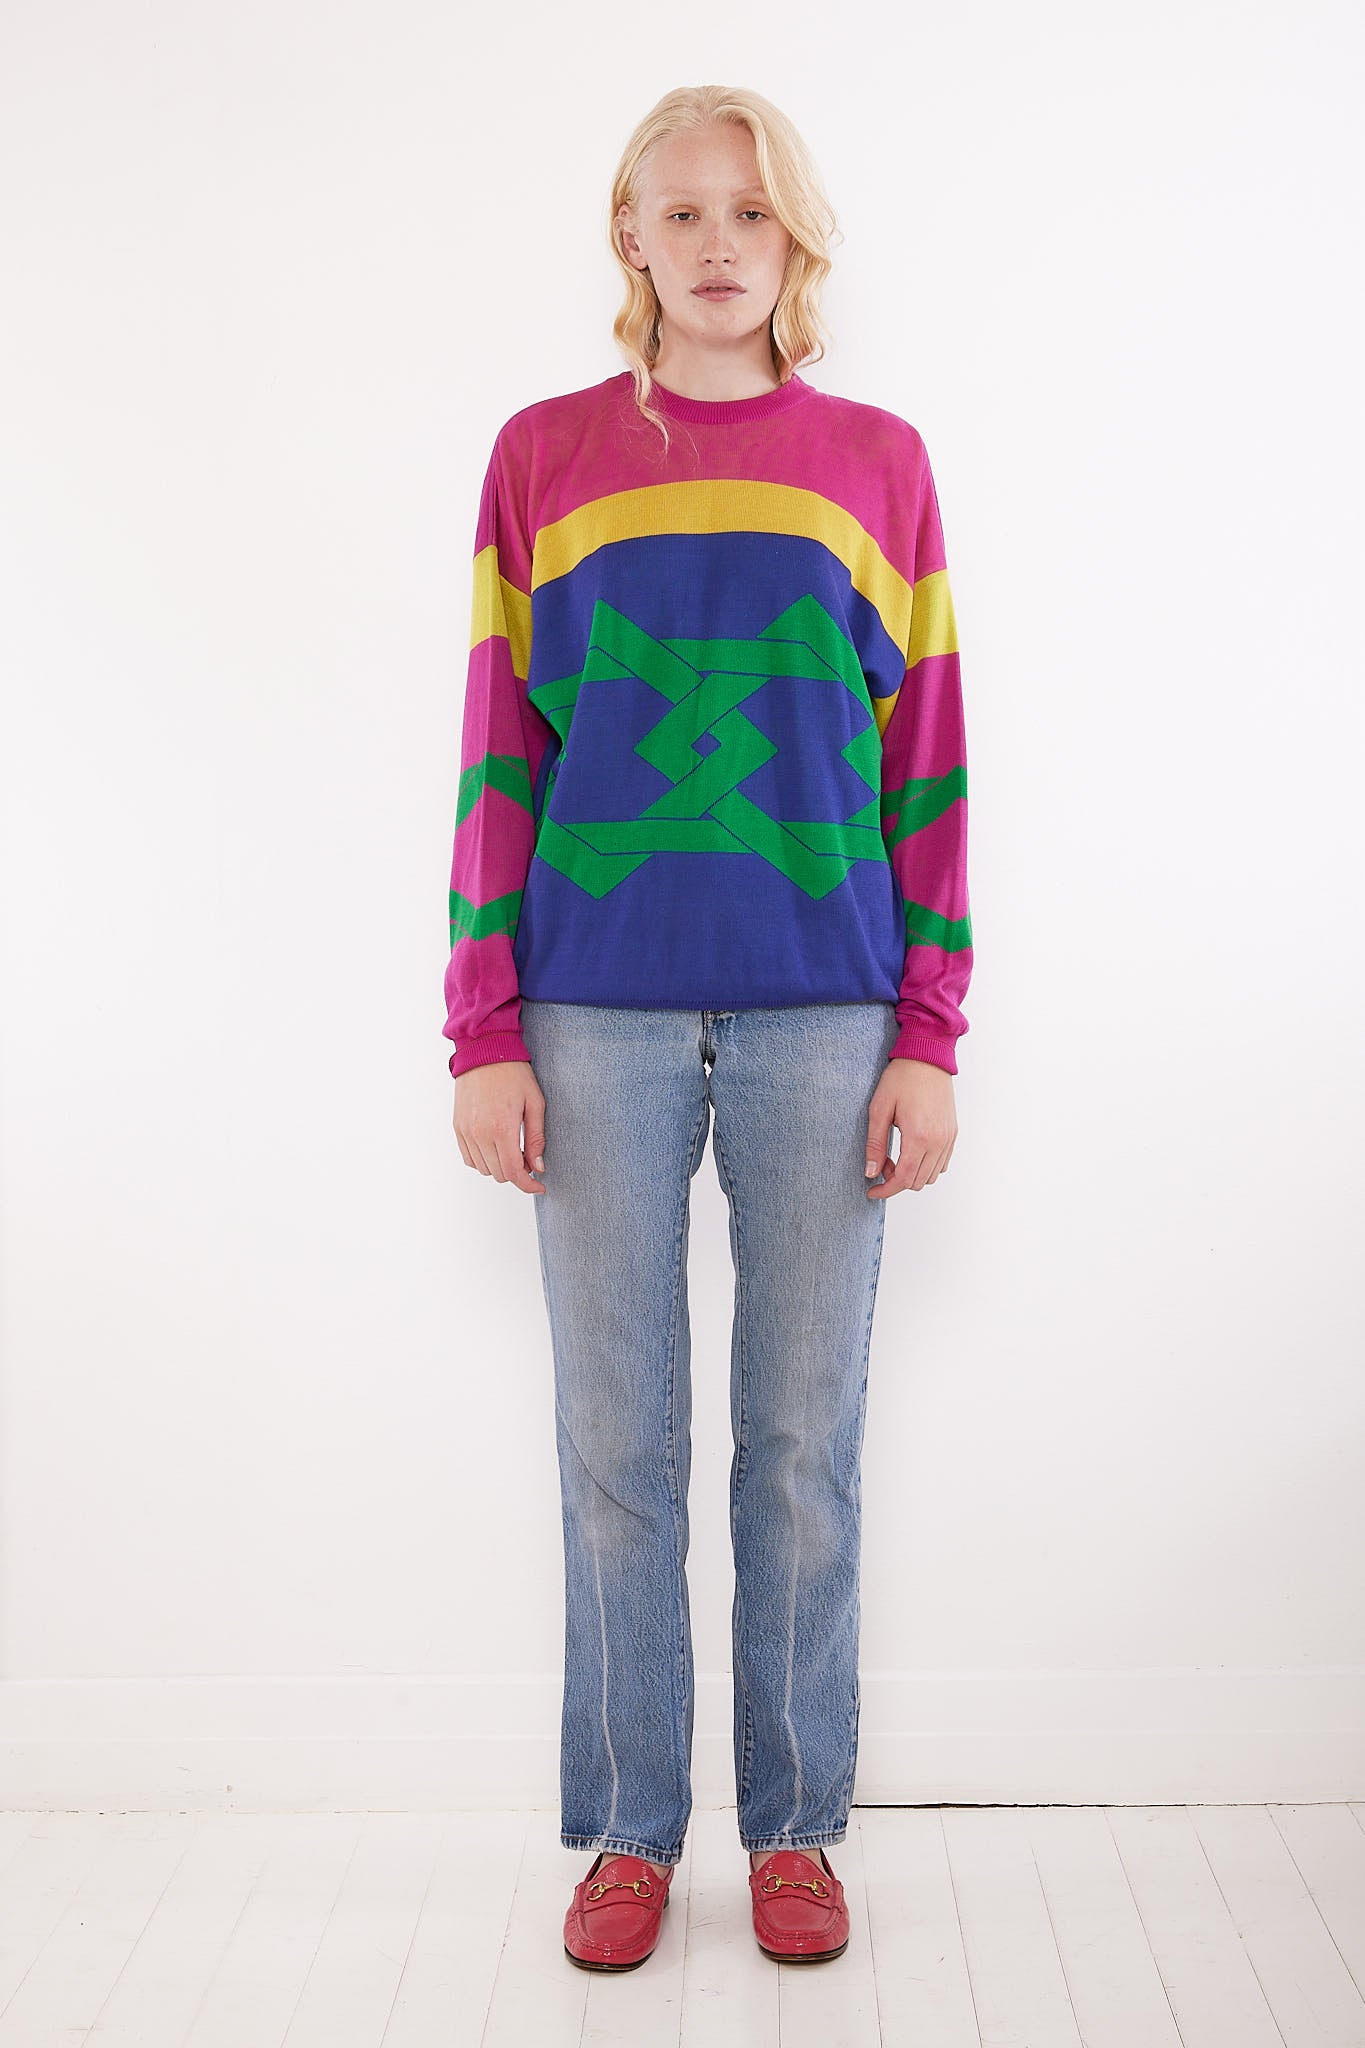 Gianni Versace <br> 90's graphic pattern knit sweater